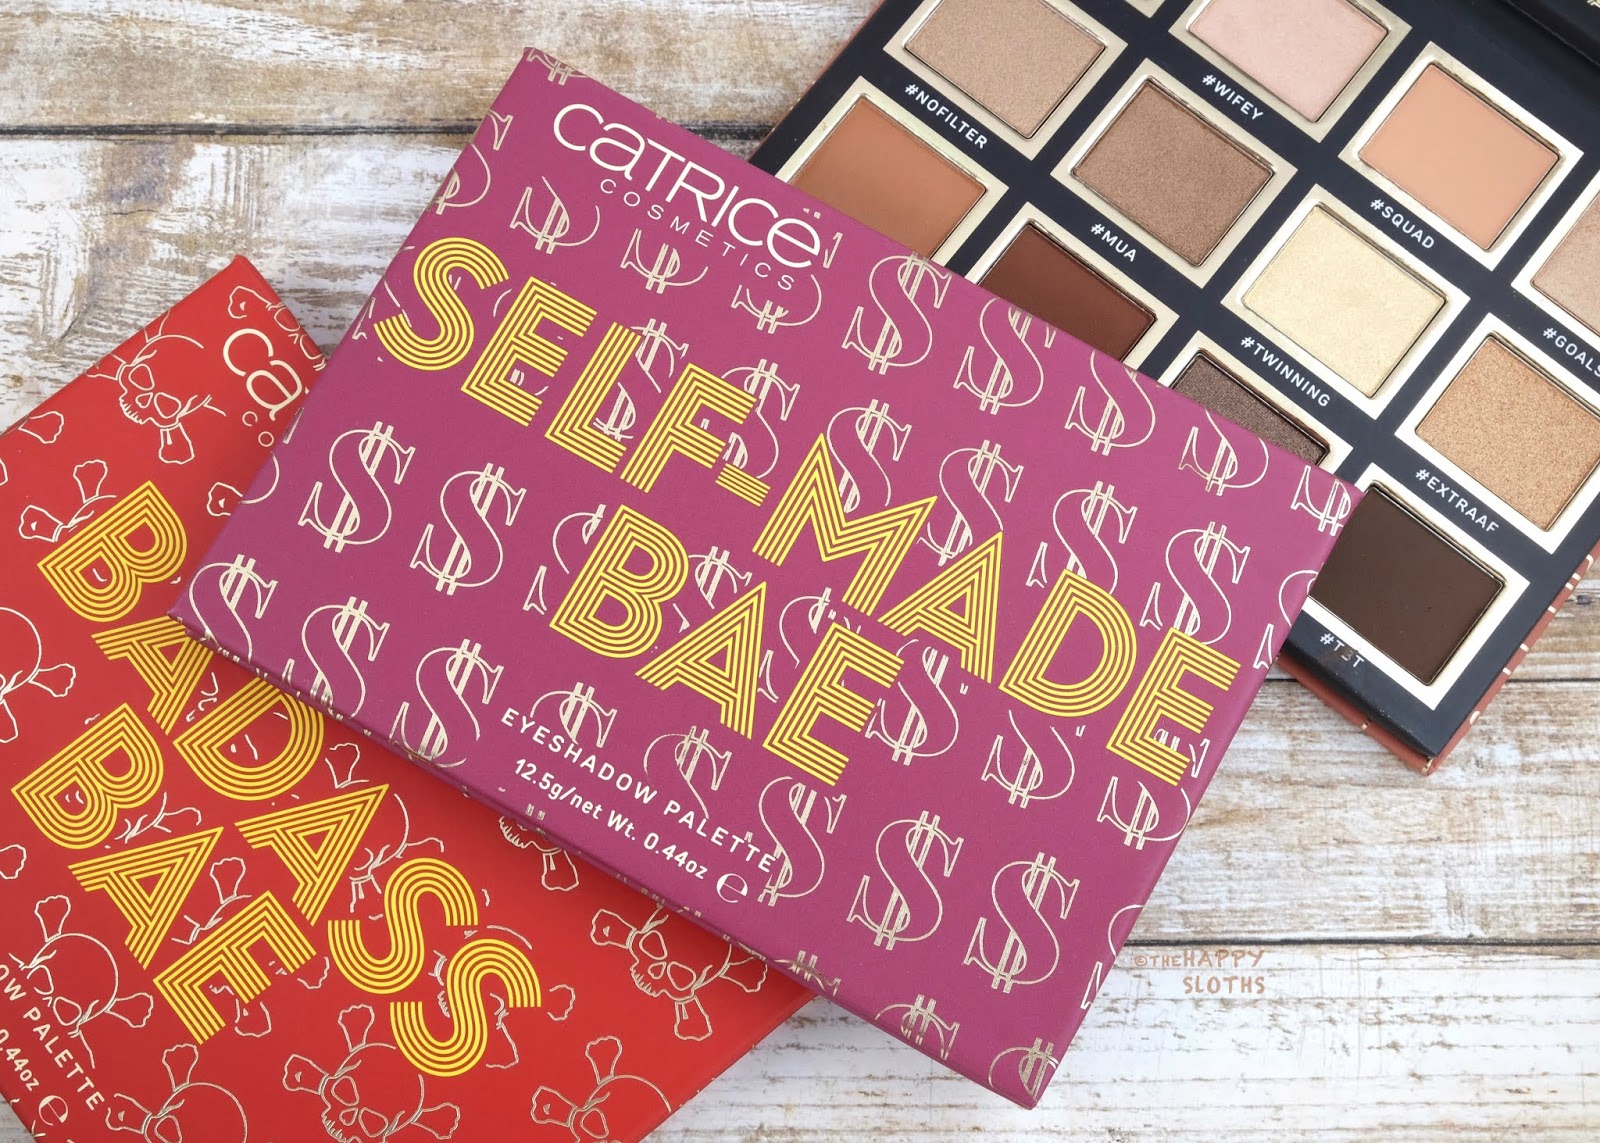 Catrice | Basic Bae, Badass Bae & Self-Made Bae Eyeshadow Palettes: Review and Swatches